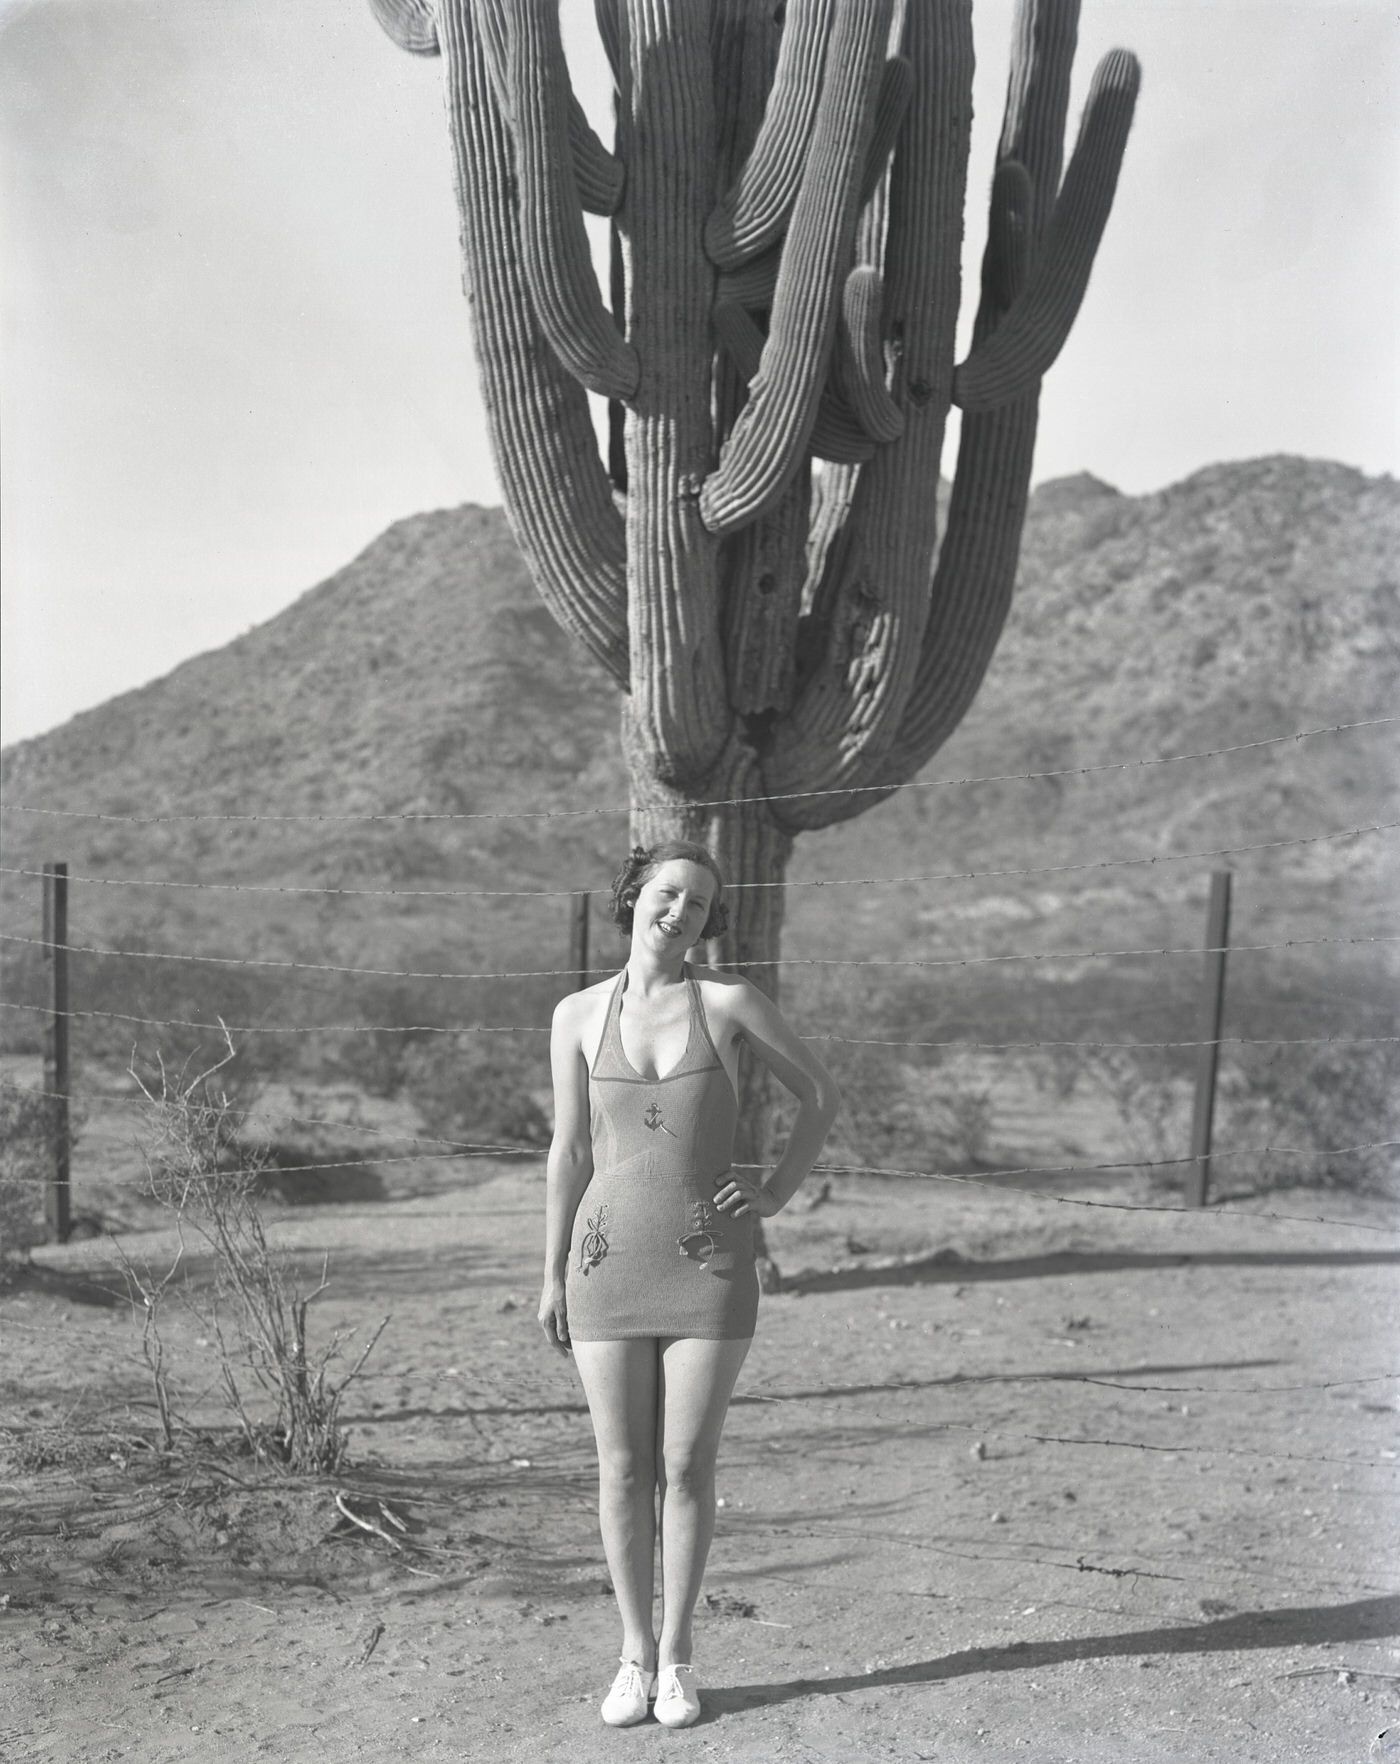 Camelback Inn Guest in Bathing Suit in Front of Cactus, 1930s